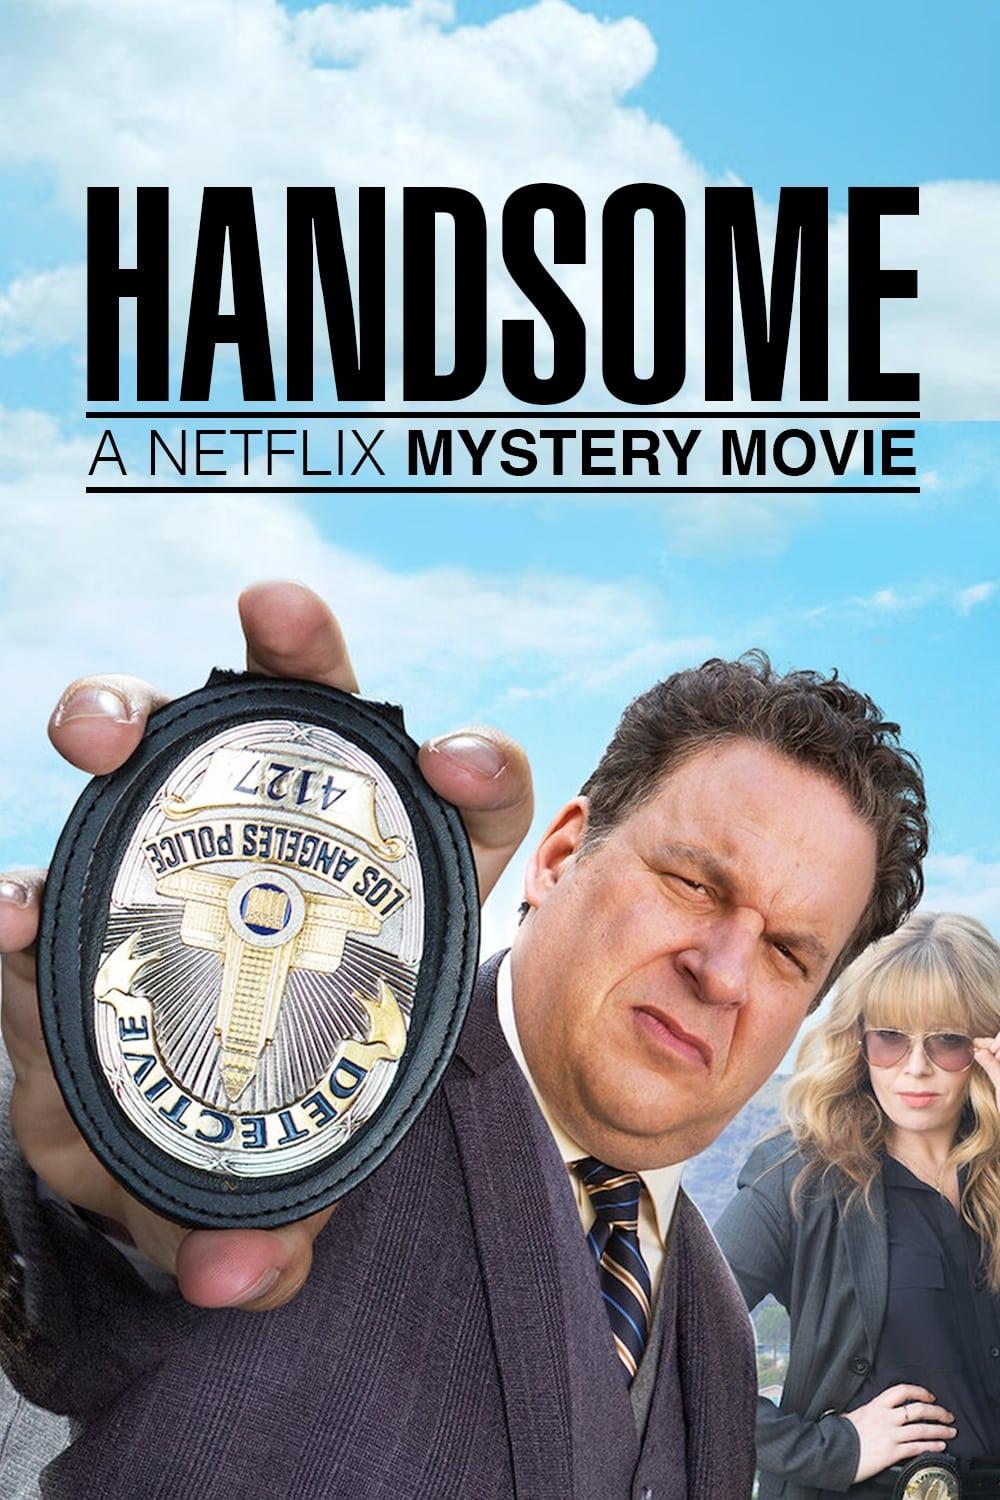 Handsome: A Netflix Mystery Movie poster